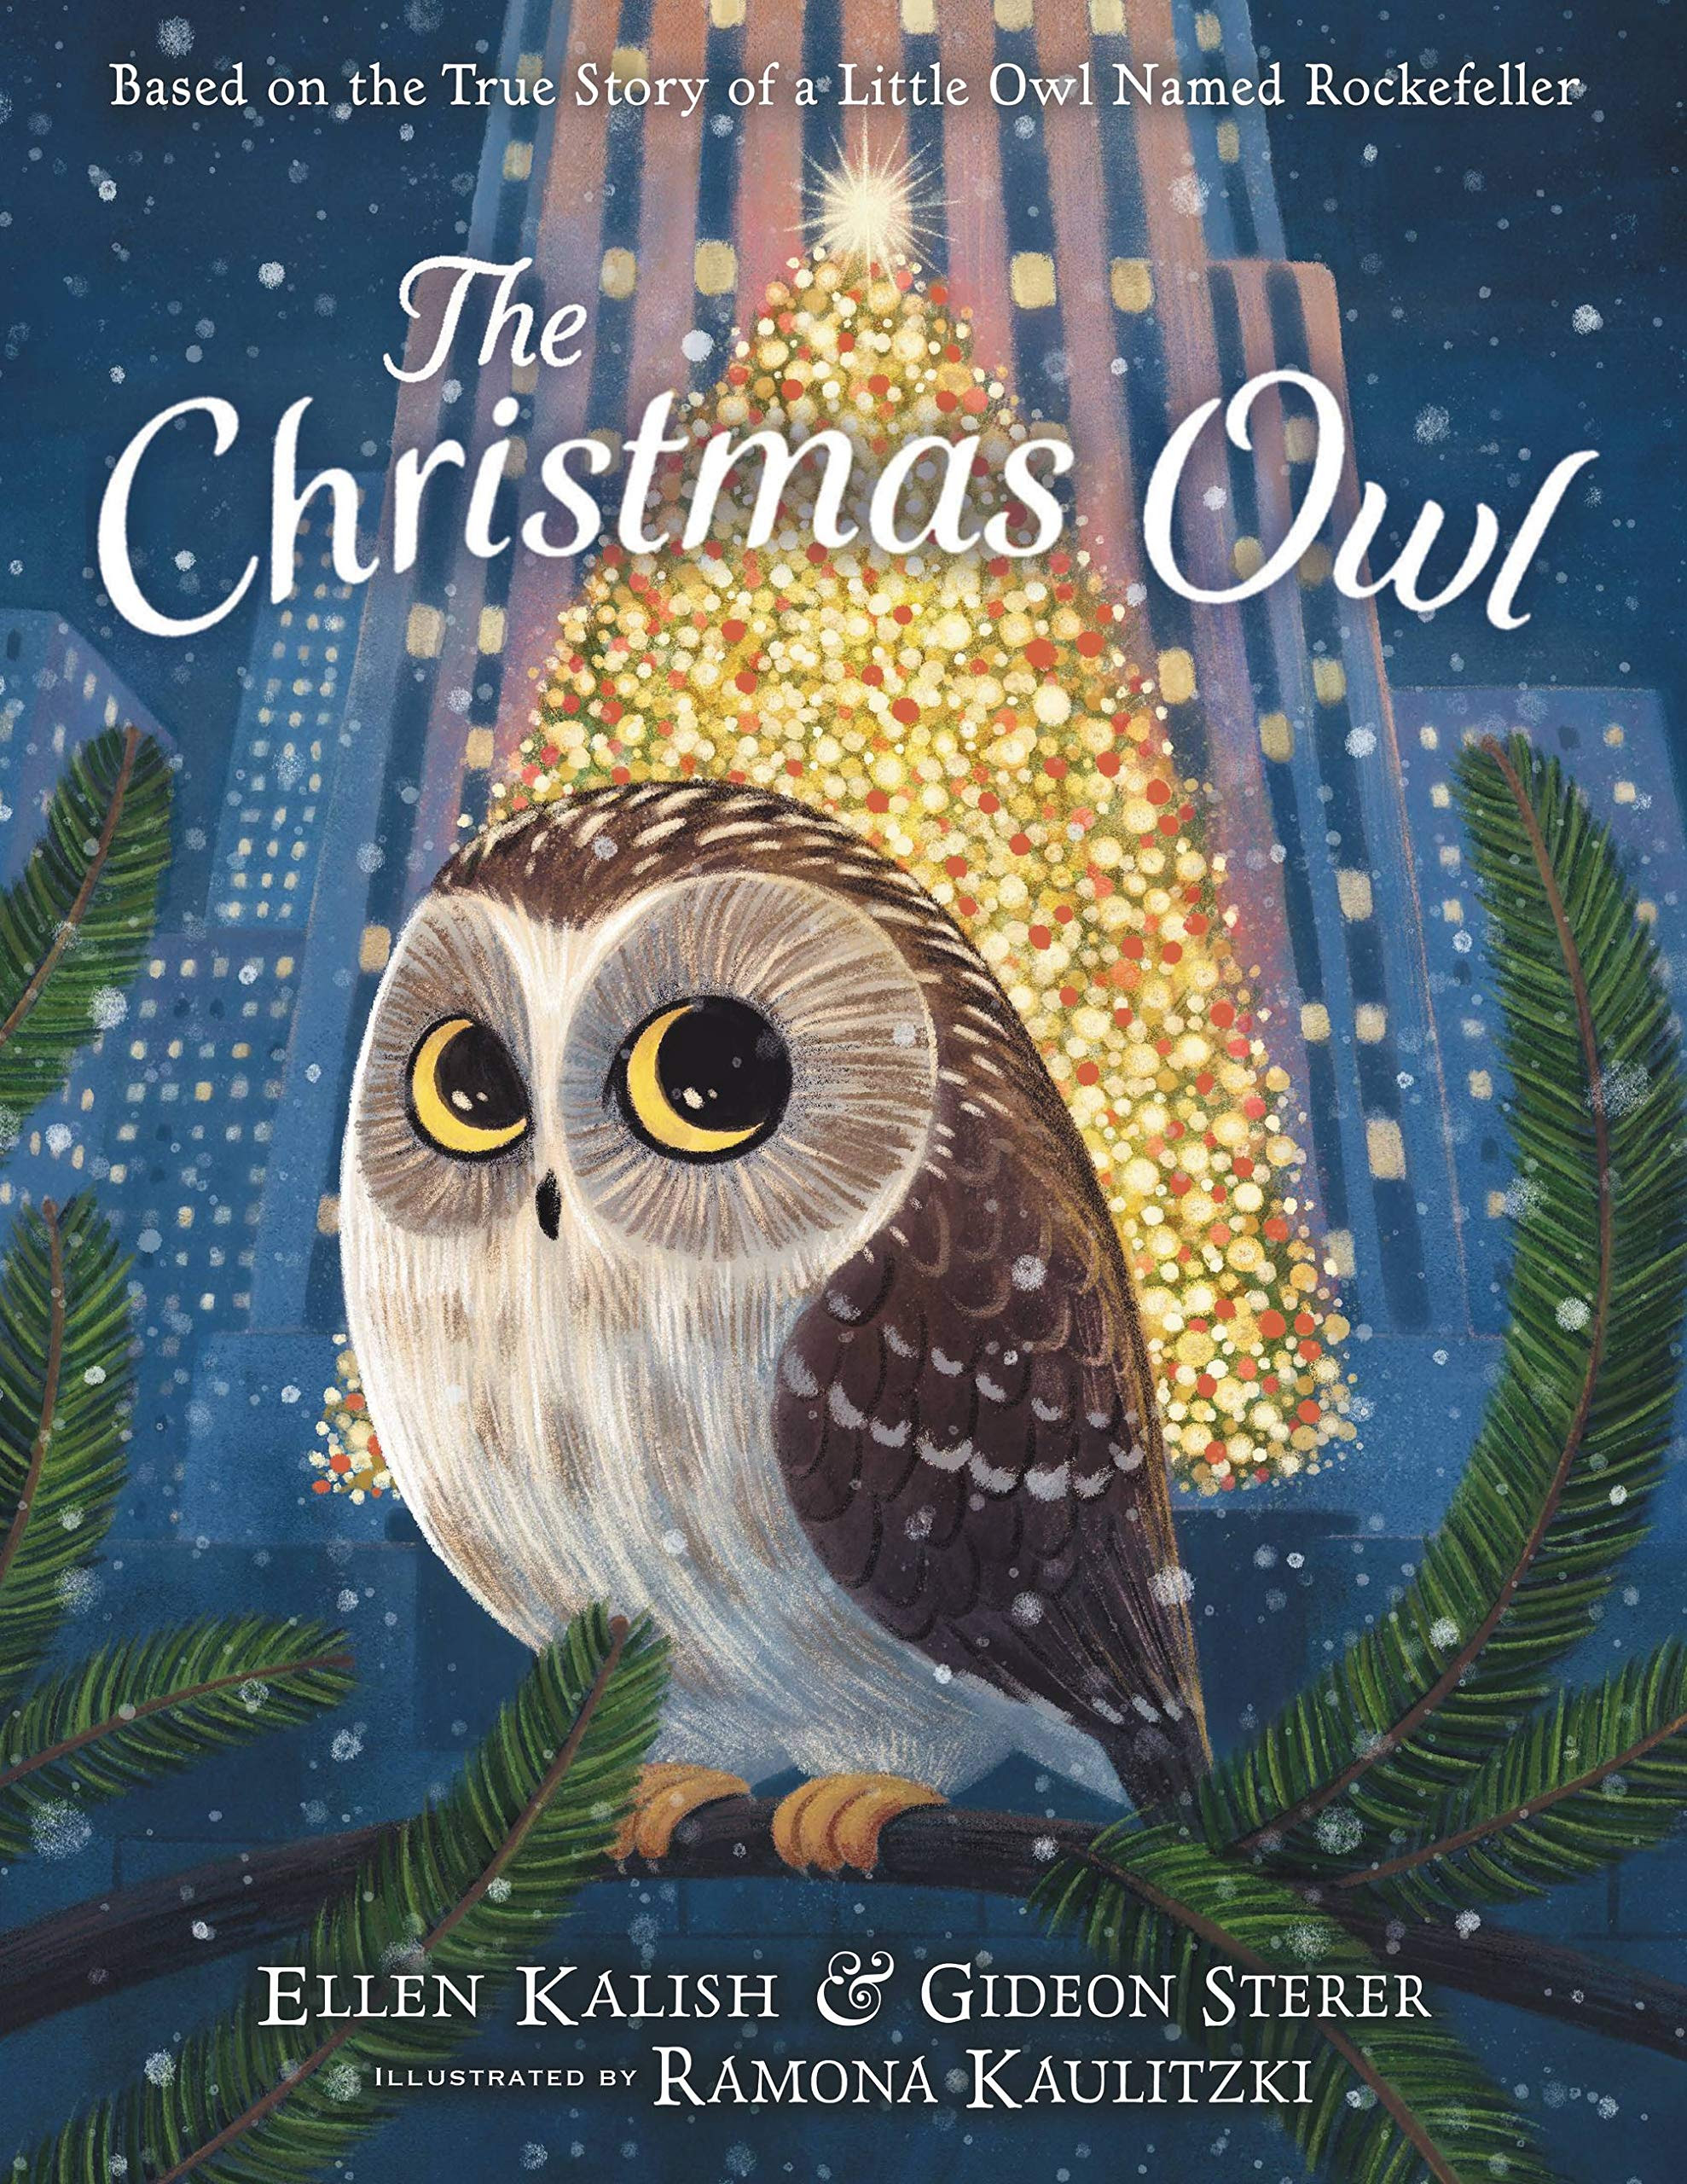 The Christmas Owl: Based on the True Story of a Little Owl Named Rockefeller in Kindle/PDF/EPUB